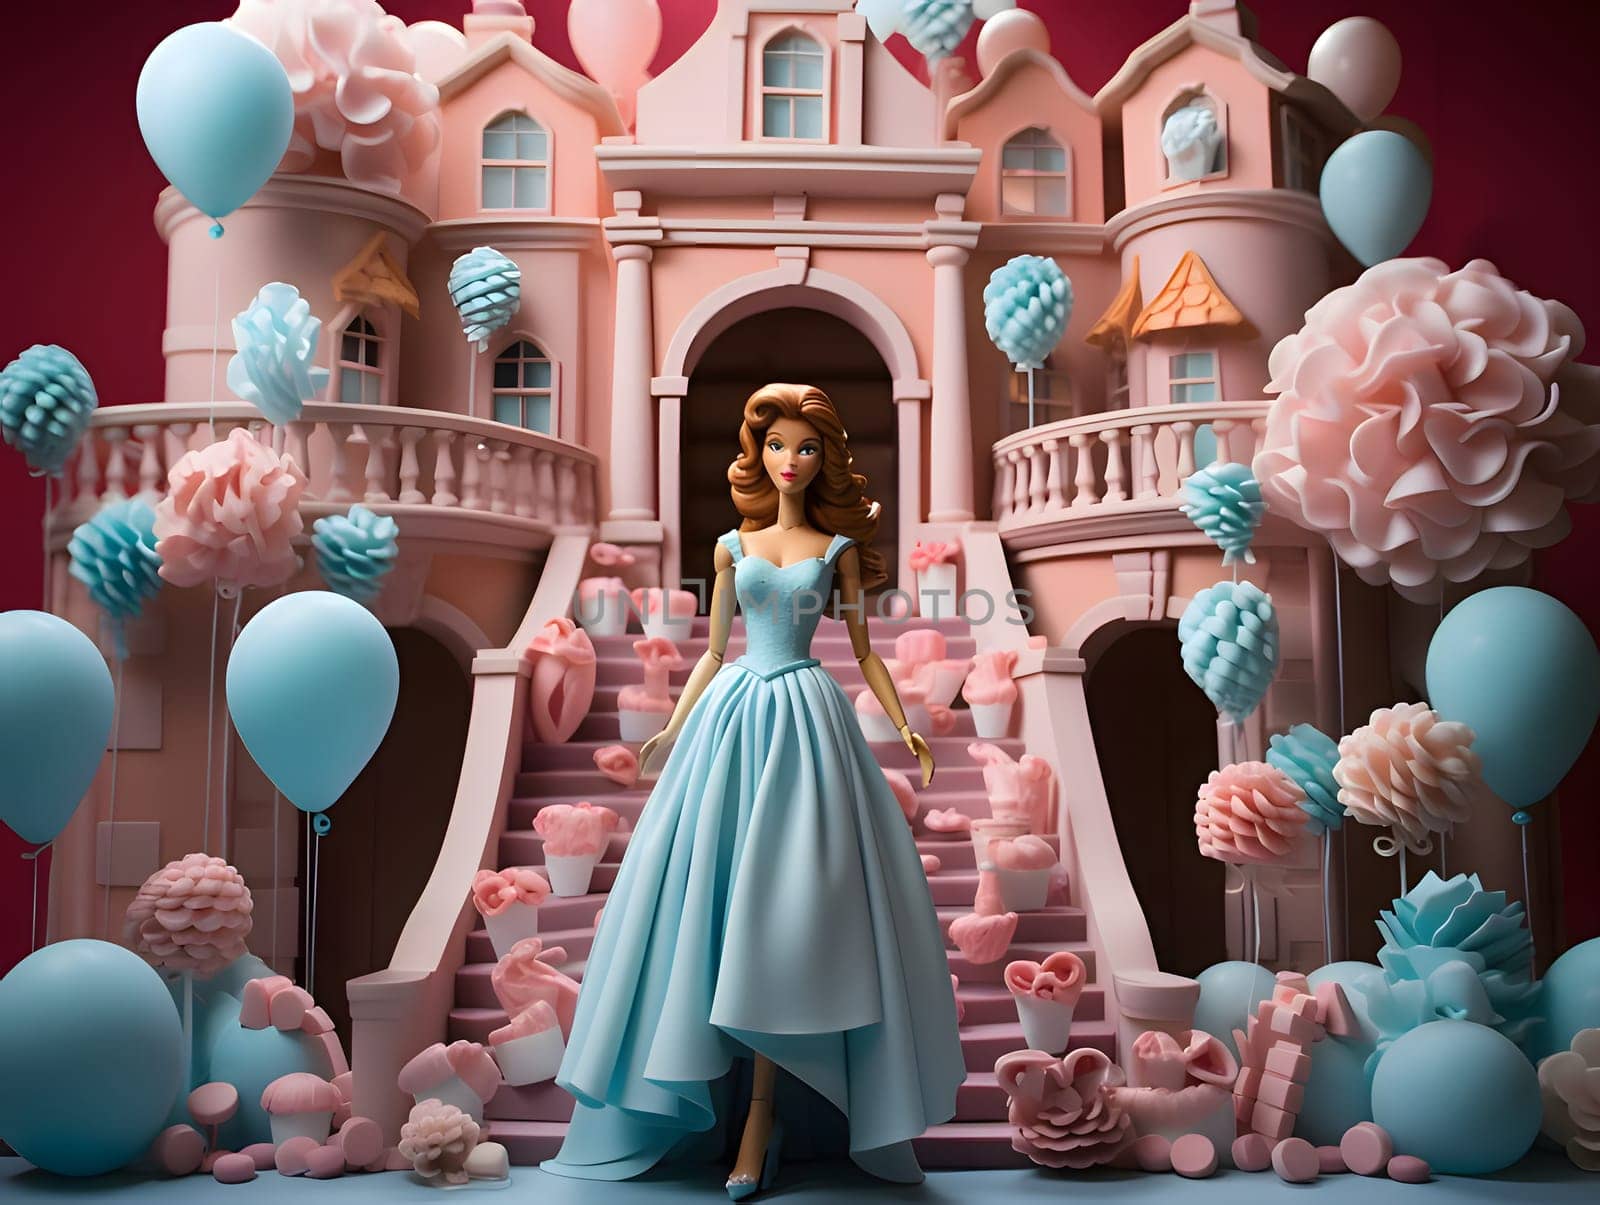 Brown-haired Barbie doll in a blue long dress against the background of a pink and blue castle. by ThemesS